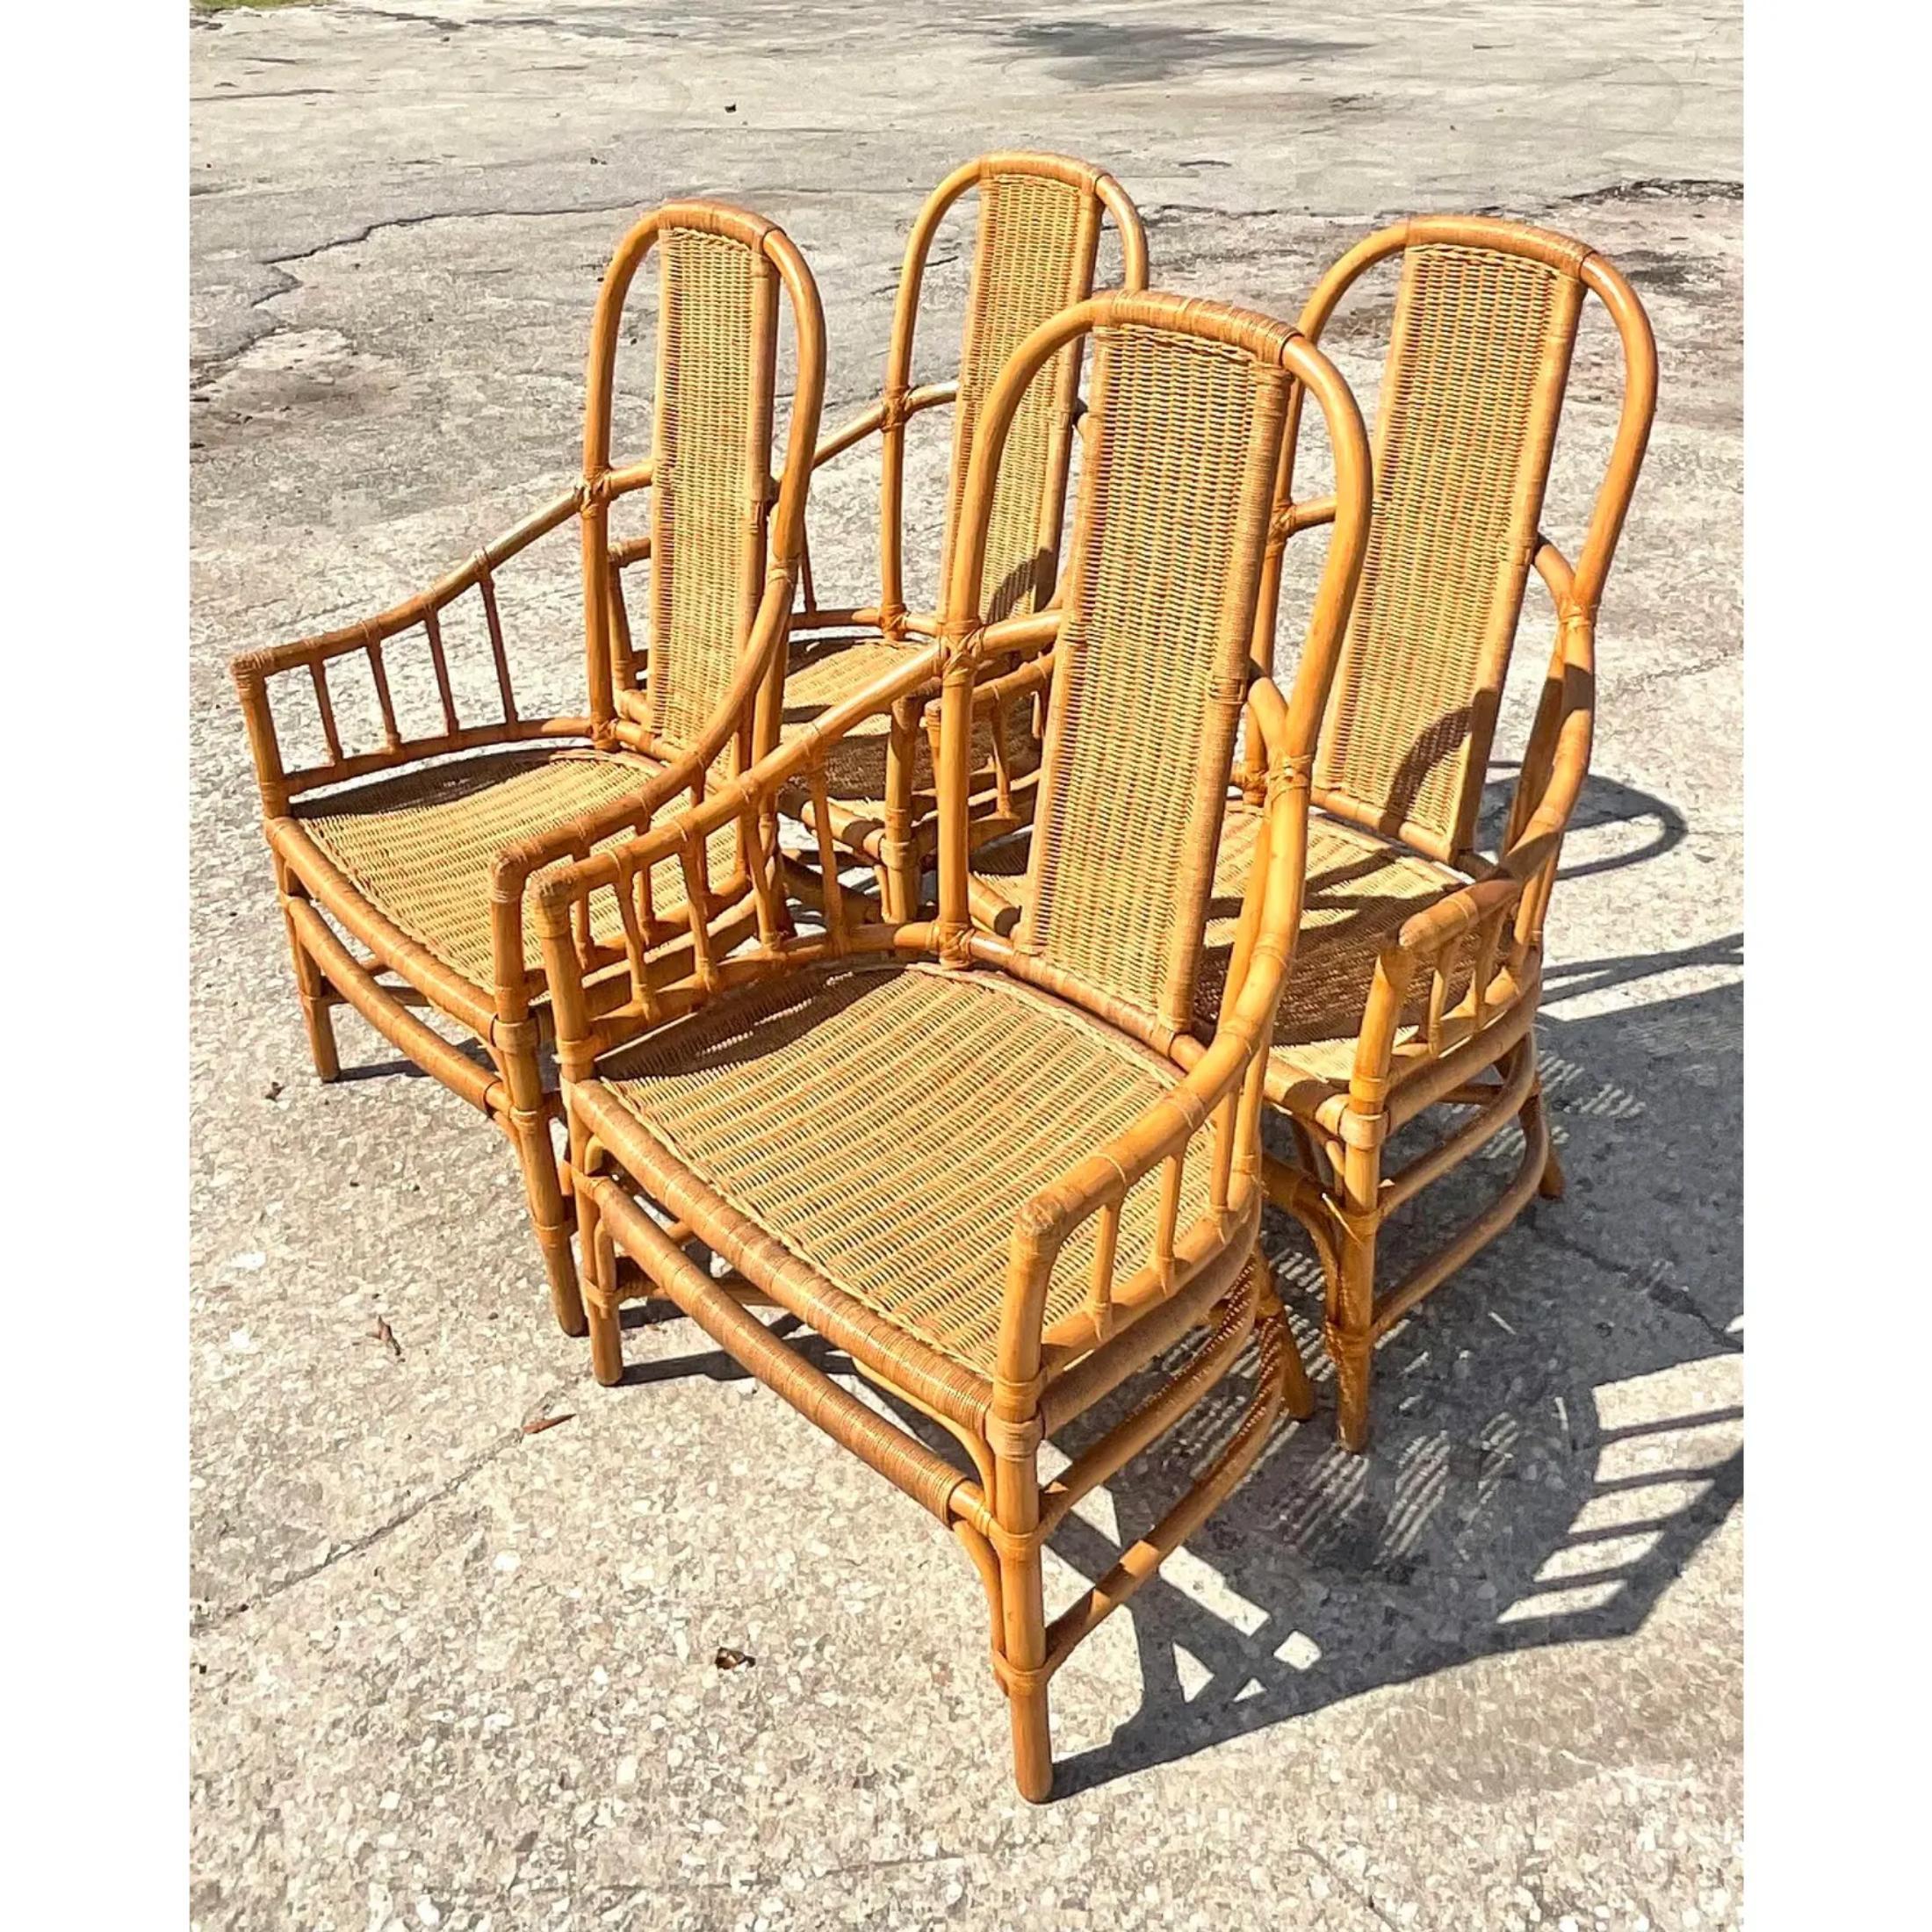 Vintage Coastal Mark David Woven Rattan Dining Chairs - Set of 4 For Sale 2